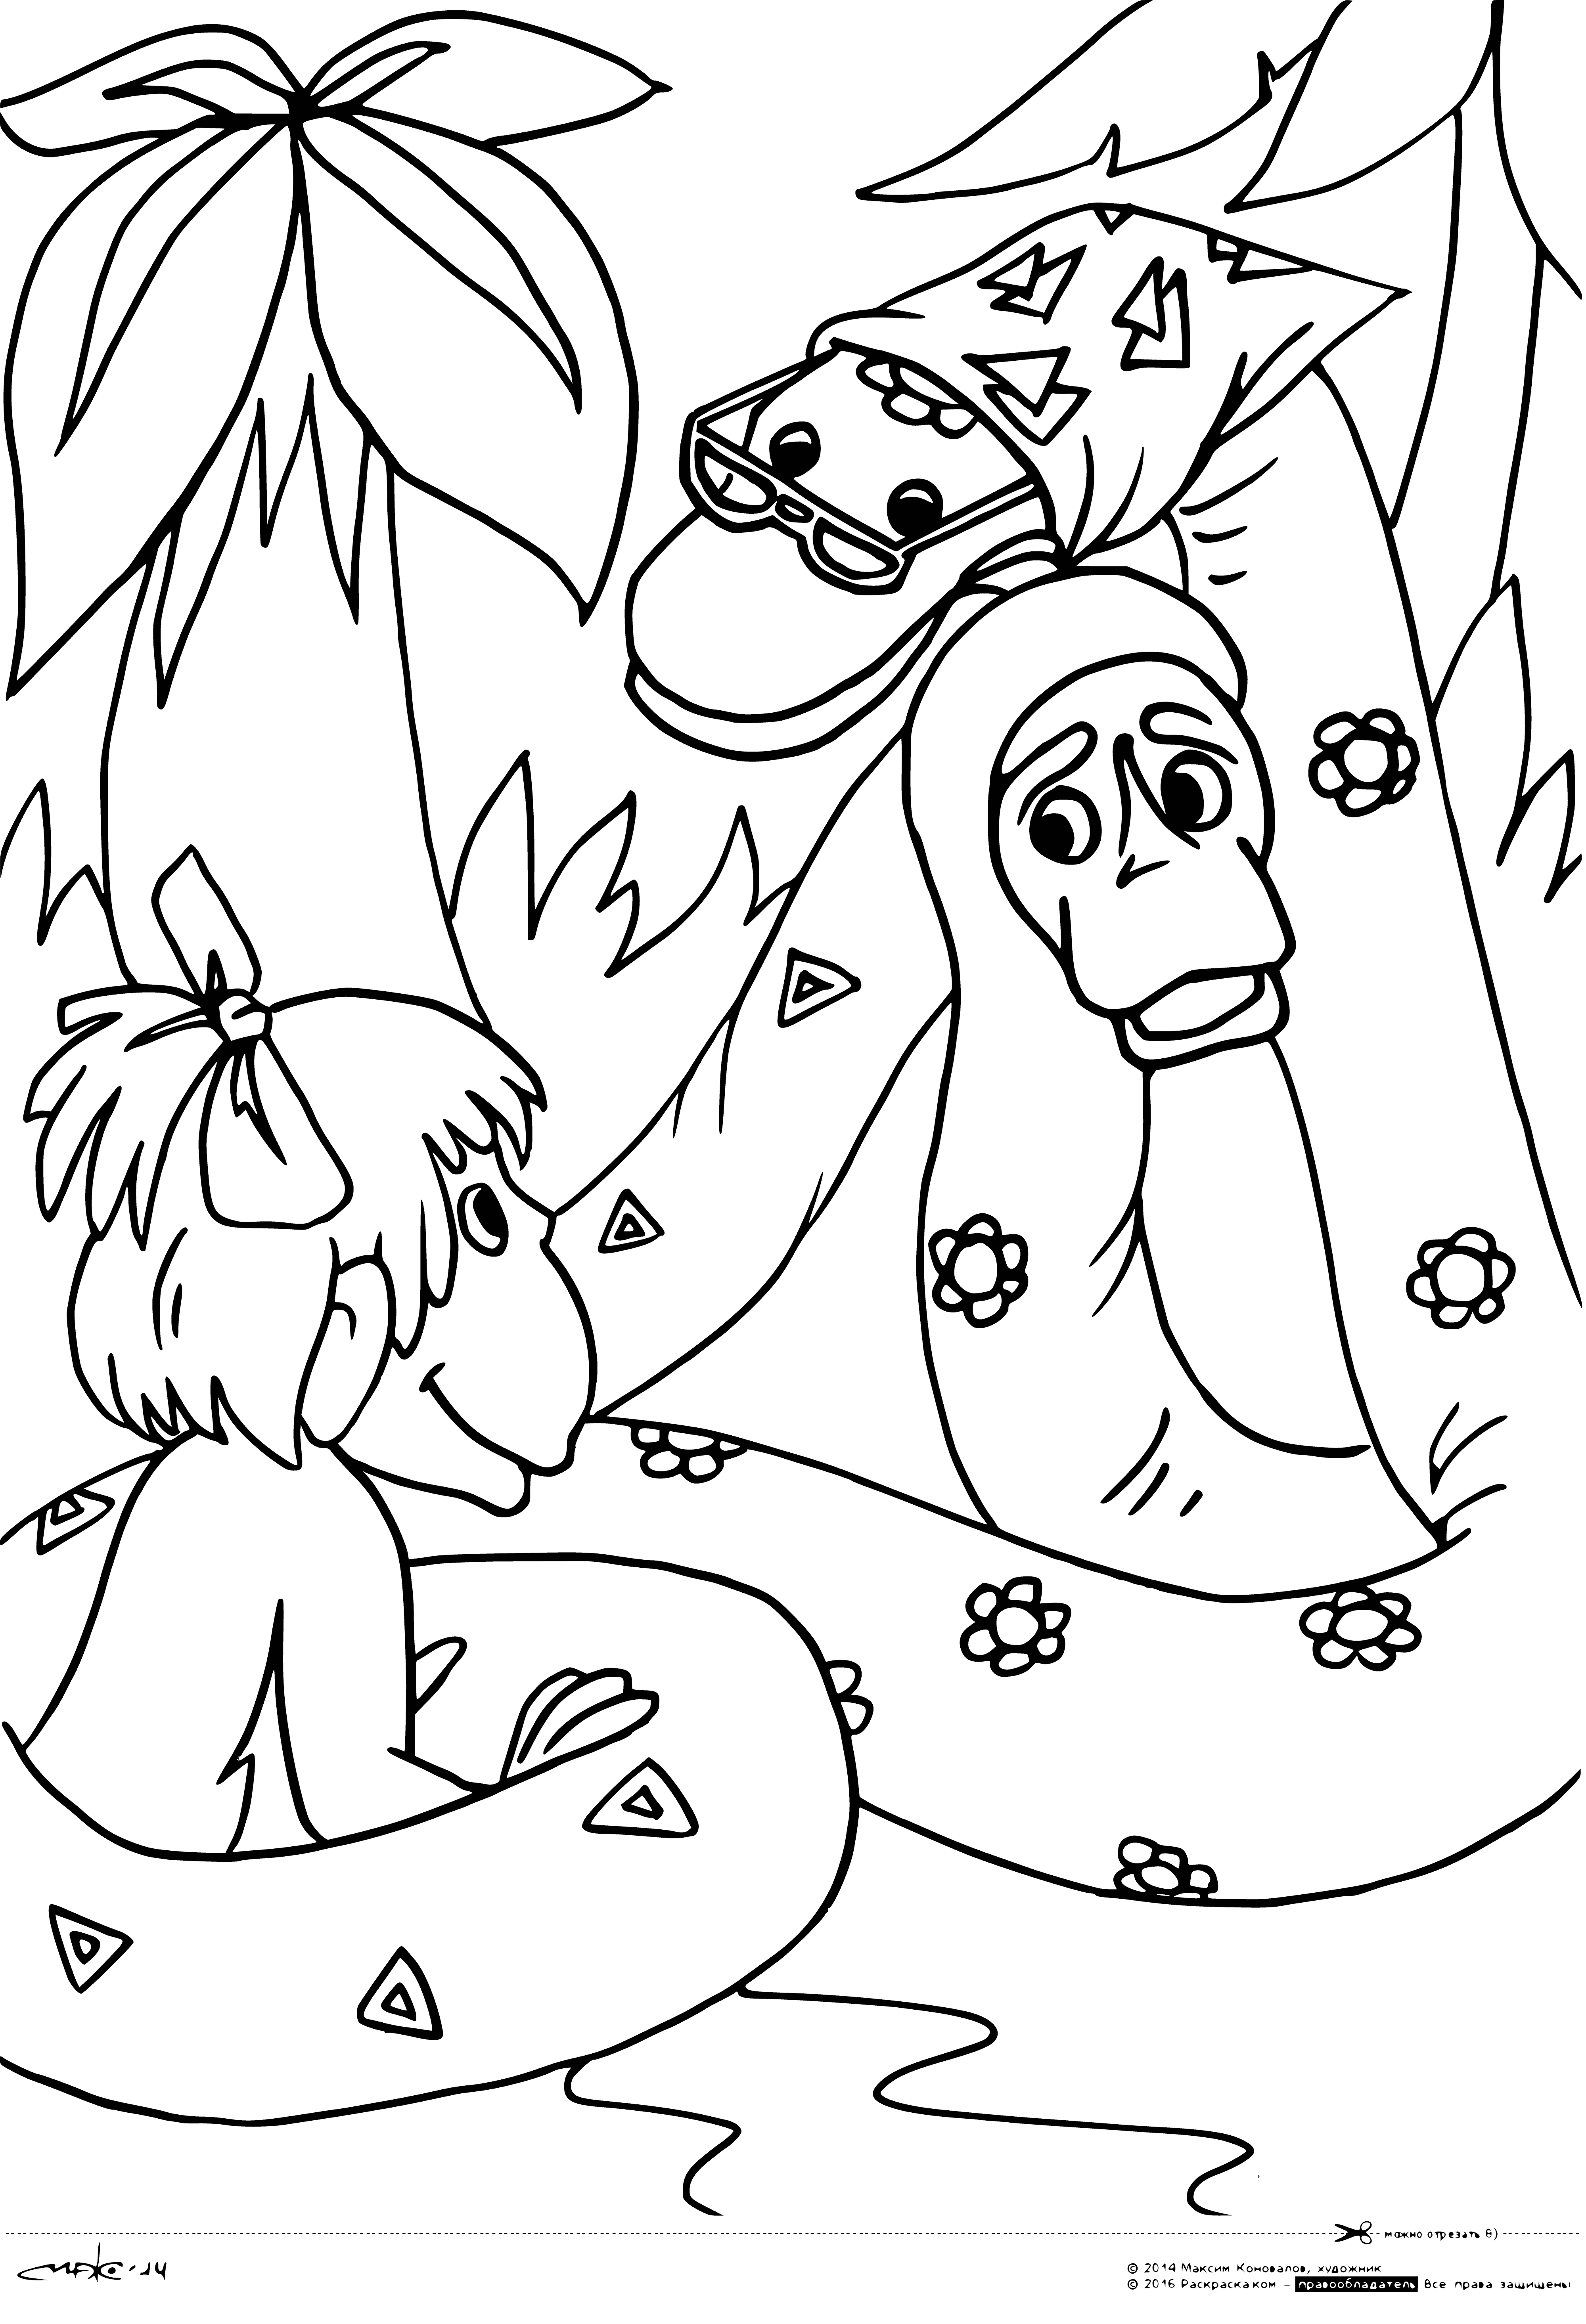 coloring page: 38 parrots, monkey and boa constrictor on coloring page. Boa wrapped around branch, monkey on ground.